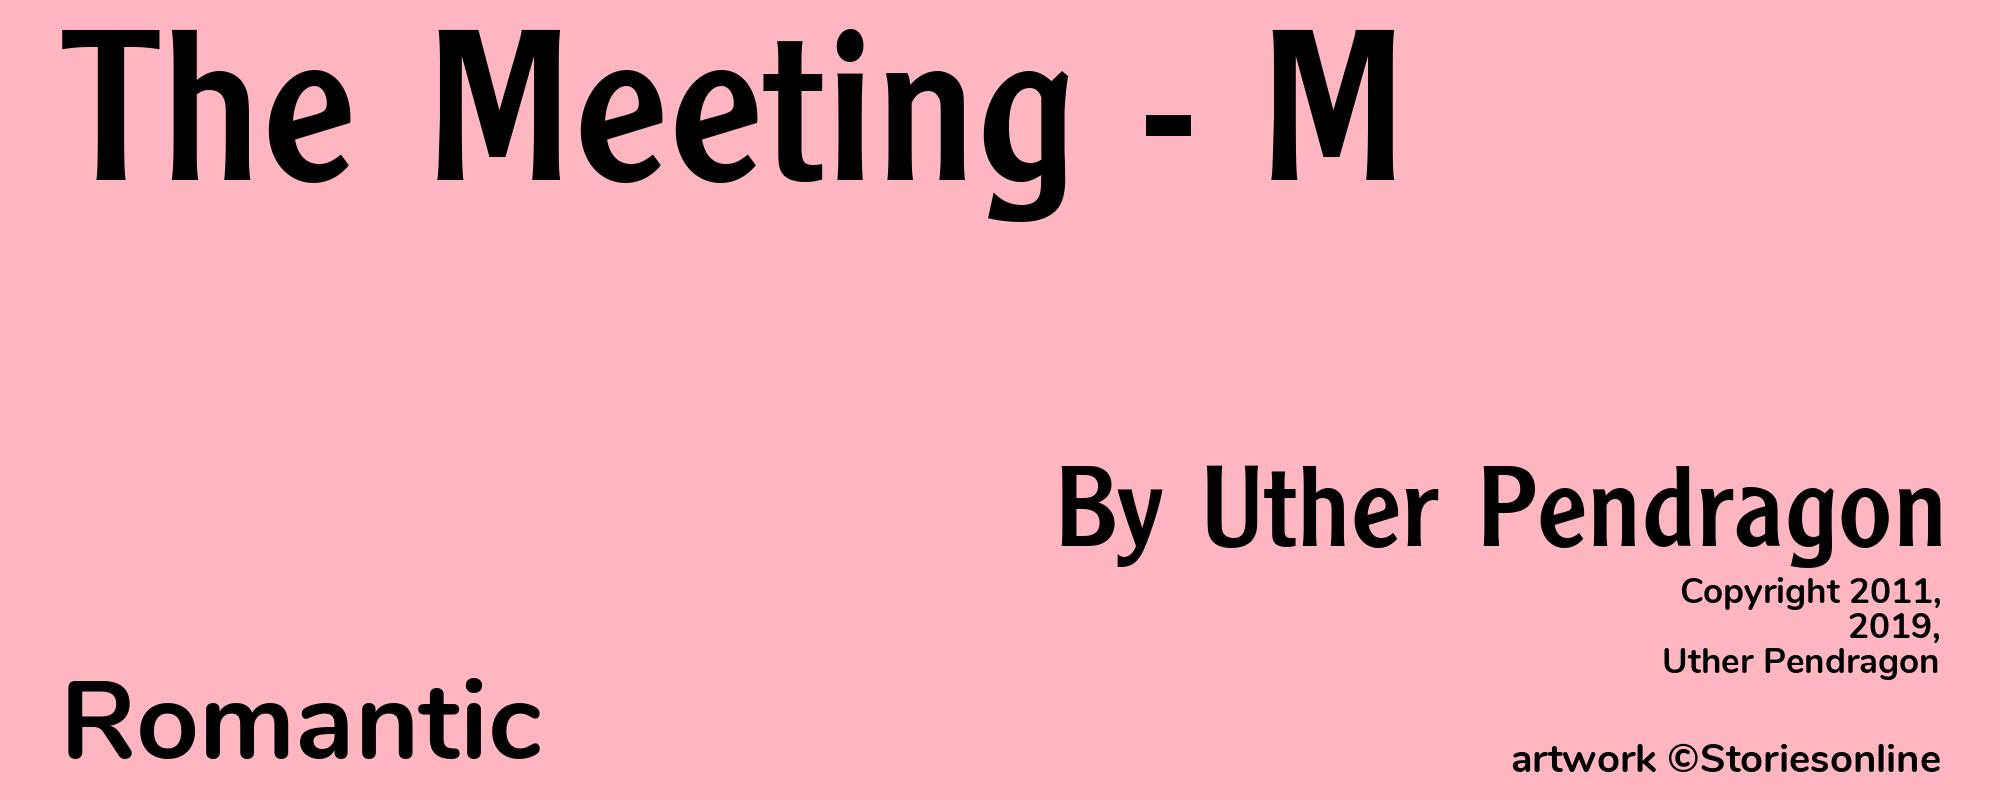 The Meeting - M - Cover